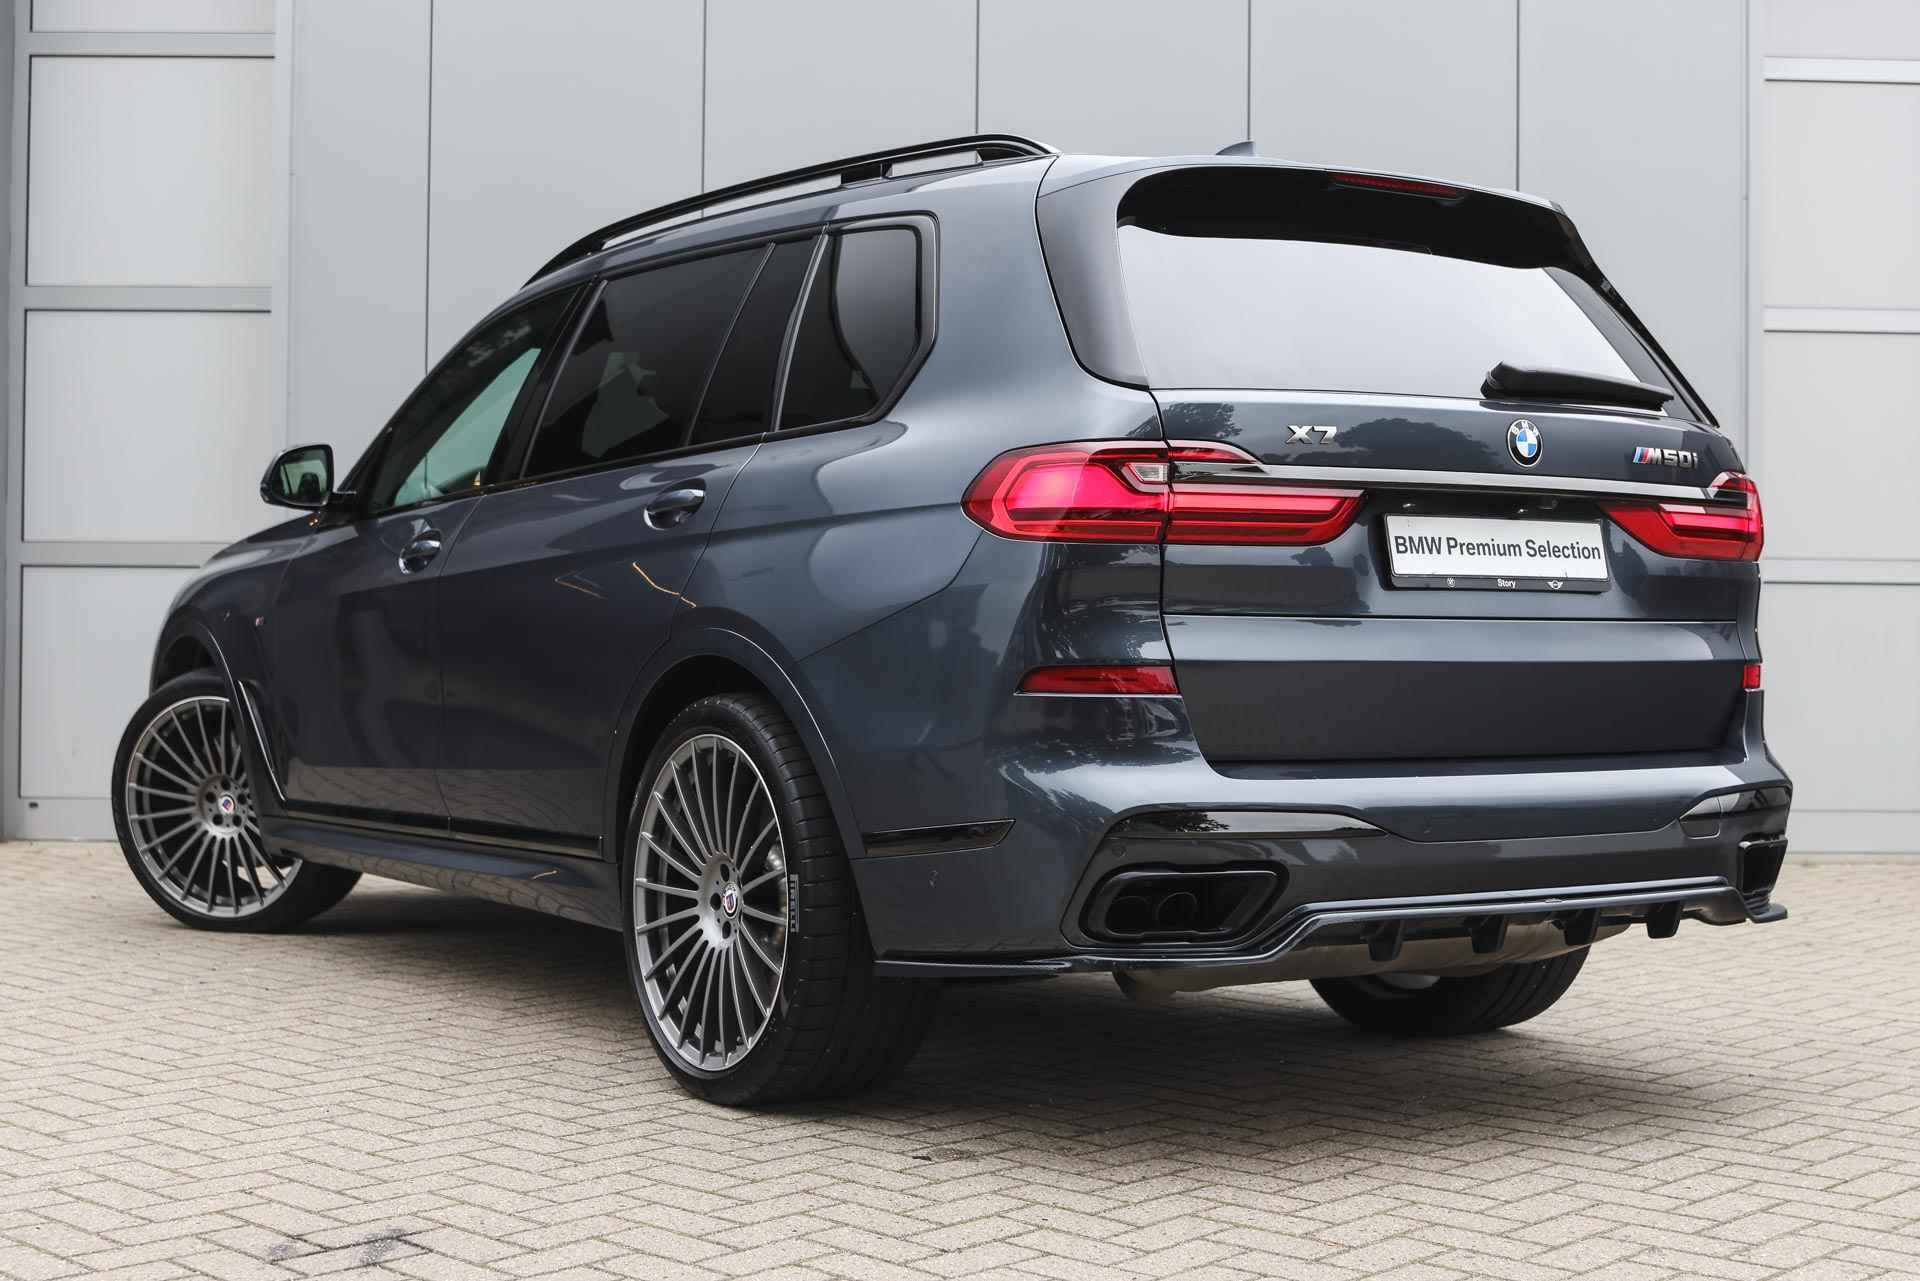 BMW X7 M50i High Executive Automaat / Active Steering / Stoelventilatie / Laserlight / Soft Close / Head-Up / Gesture Control / Parking Assistant Plus / Alpina wielen 23 inch - 3/56